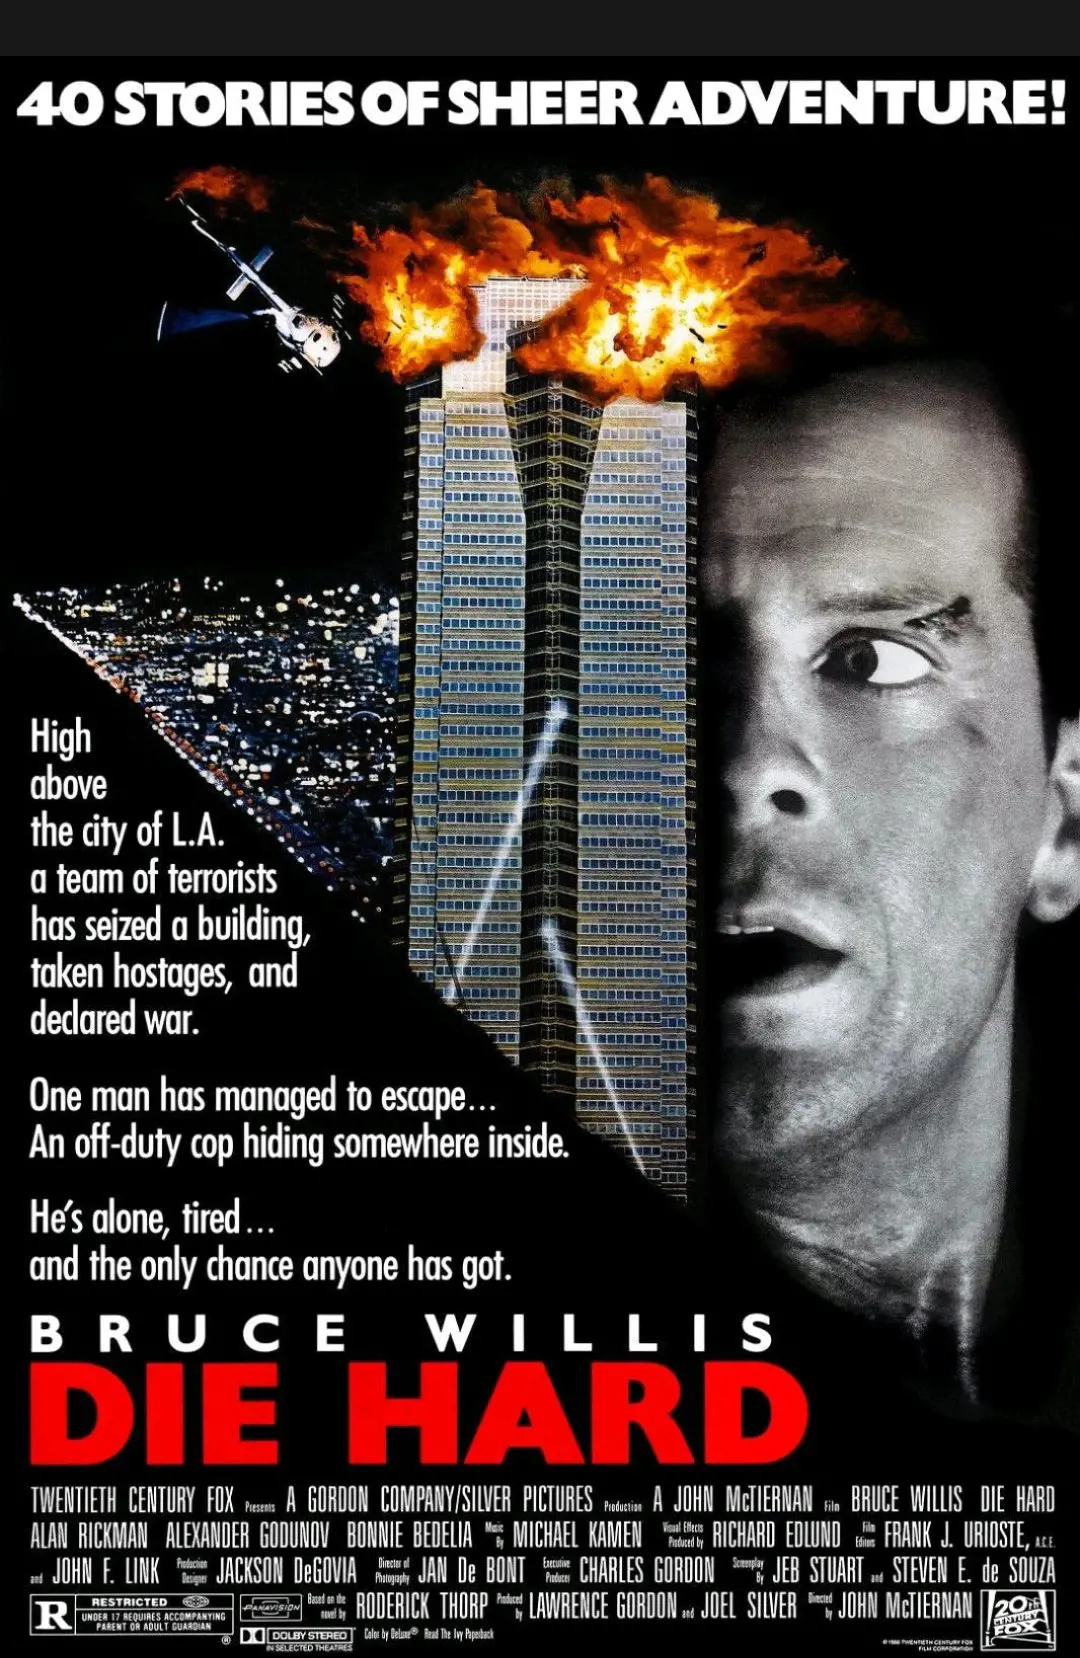 John McTiernan 1998 picture was premiered on July 12  at Avco Theater